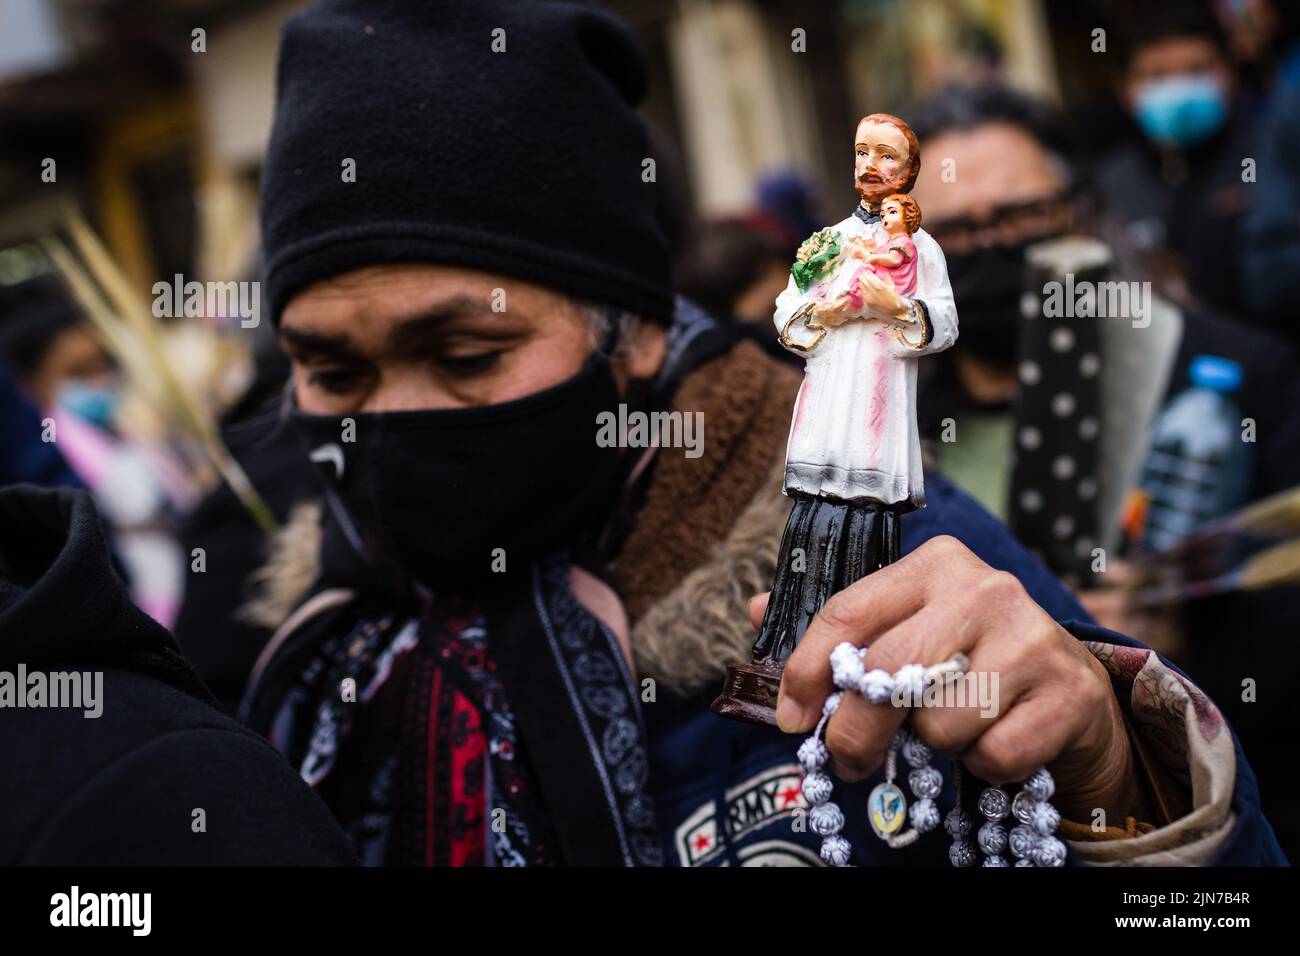 Buenos Aires, Argentina. 7th Aug, 2022. A woman holds in her hand an image of Saint Cayetano during the traditional Mass celebrated every August 7. After two years of pandemic, the great feast of San Cayetano was celebrated again in the church Santuario San Cayetano, in the cosmopolitan neighborhood Liniers of the city of Buenos Aires. As every August 7, many faithful could touch the image and venerate the Saint of Labor to ask for bread, peace and sustenance. (Credit Image: © Nacho Boullosa/SOPA Images via ZUMA Press Wire) Stock Photo